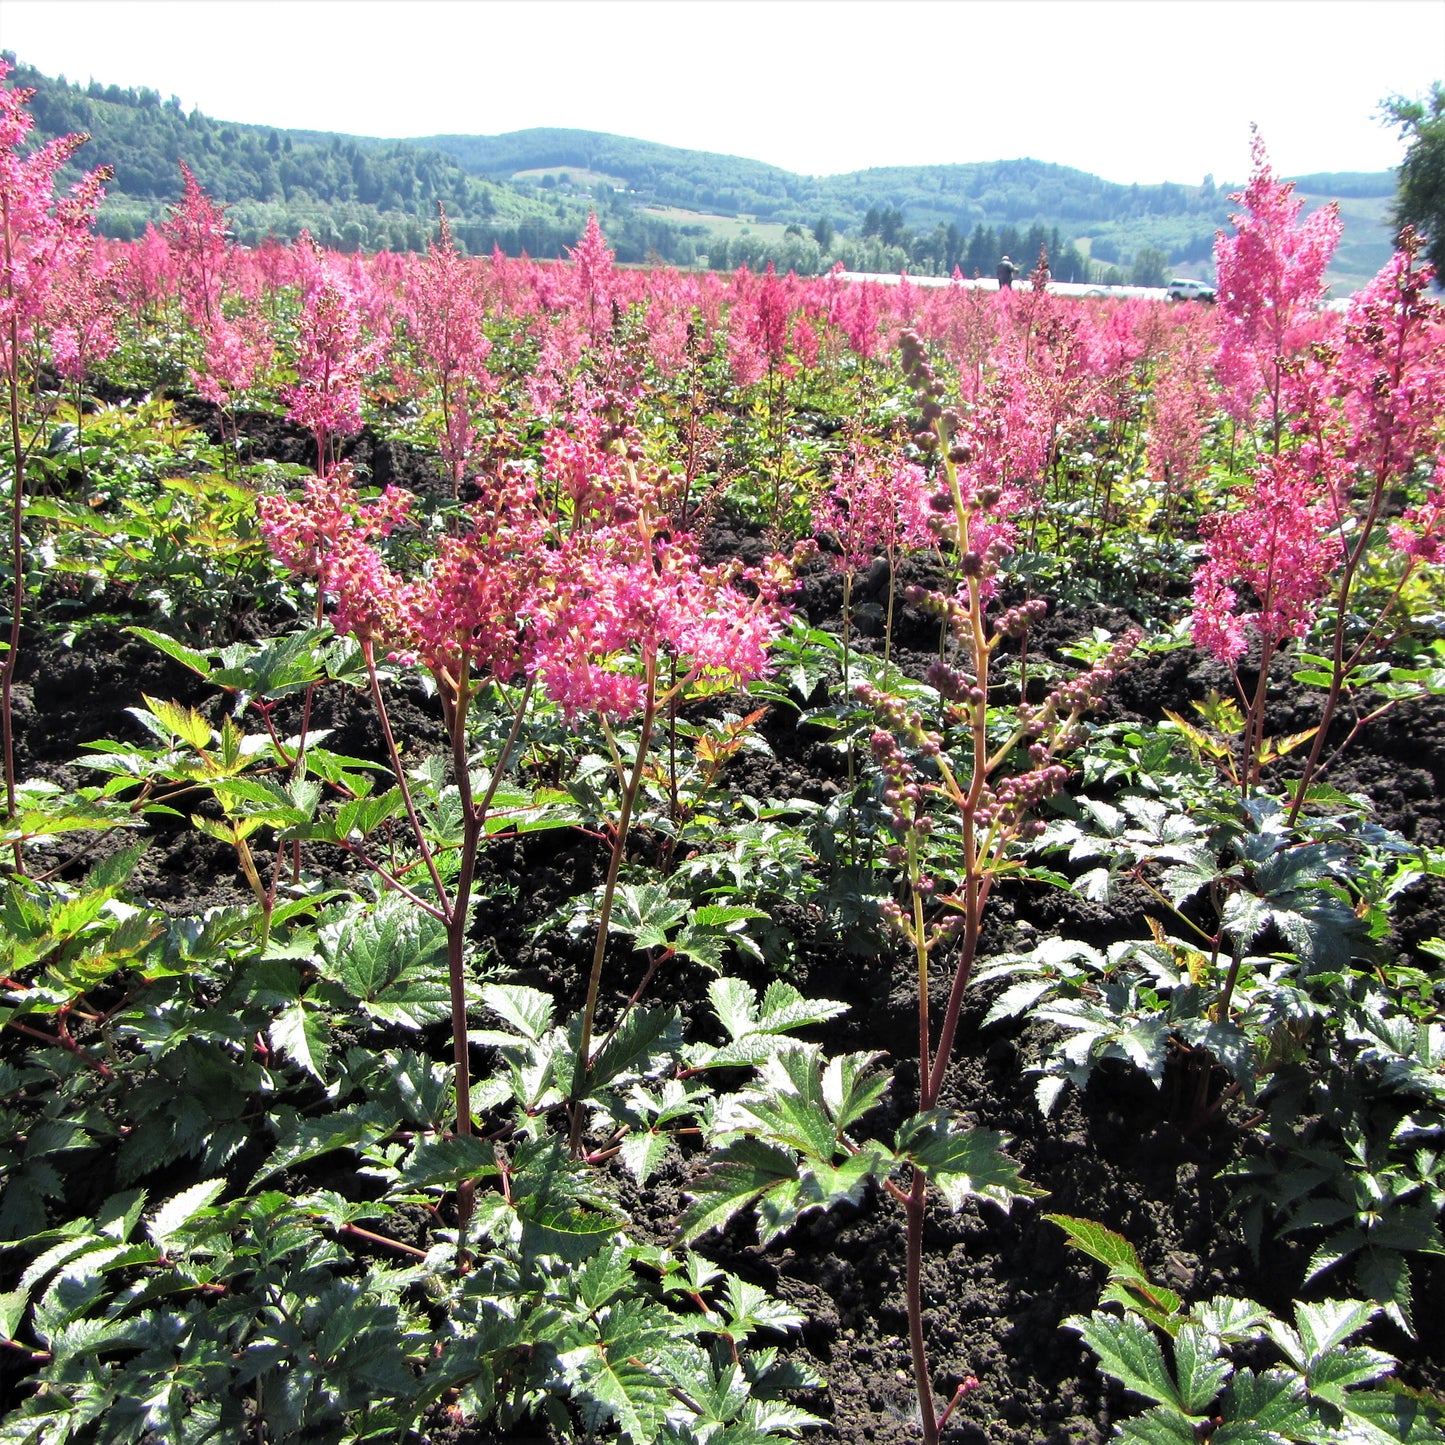 A Field Full of Pink Astilbe